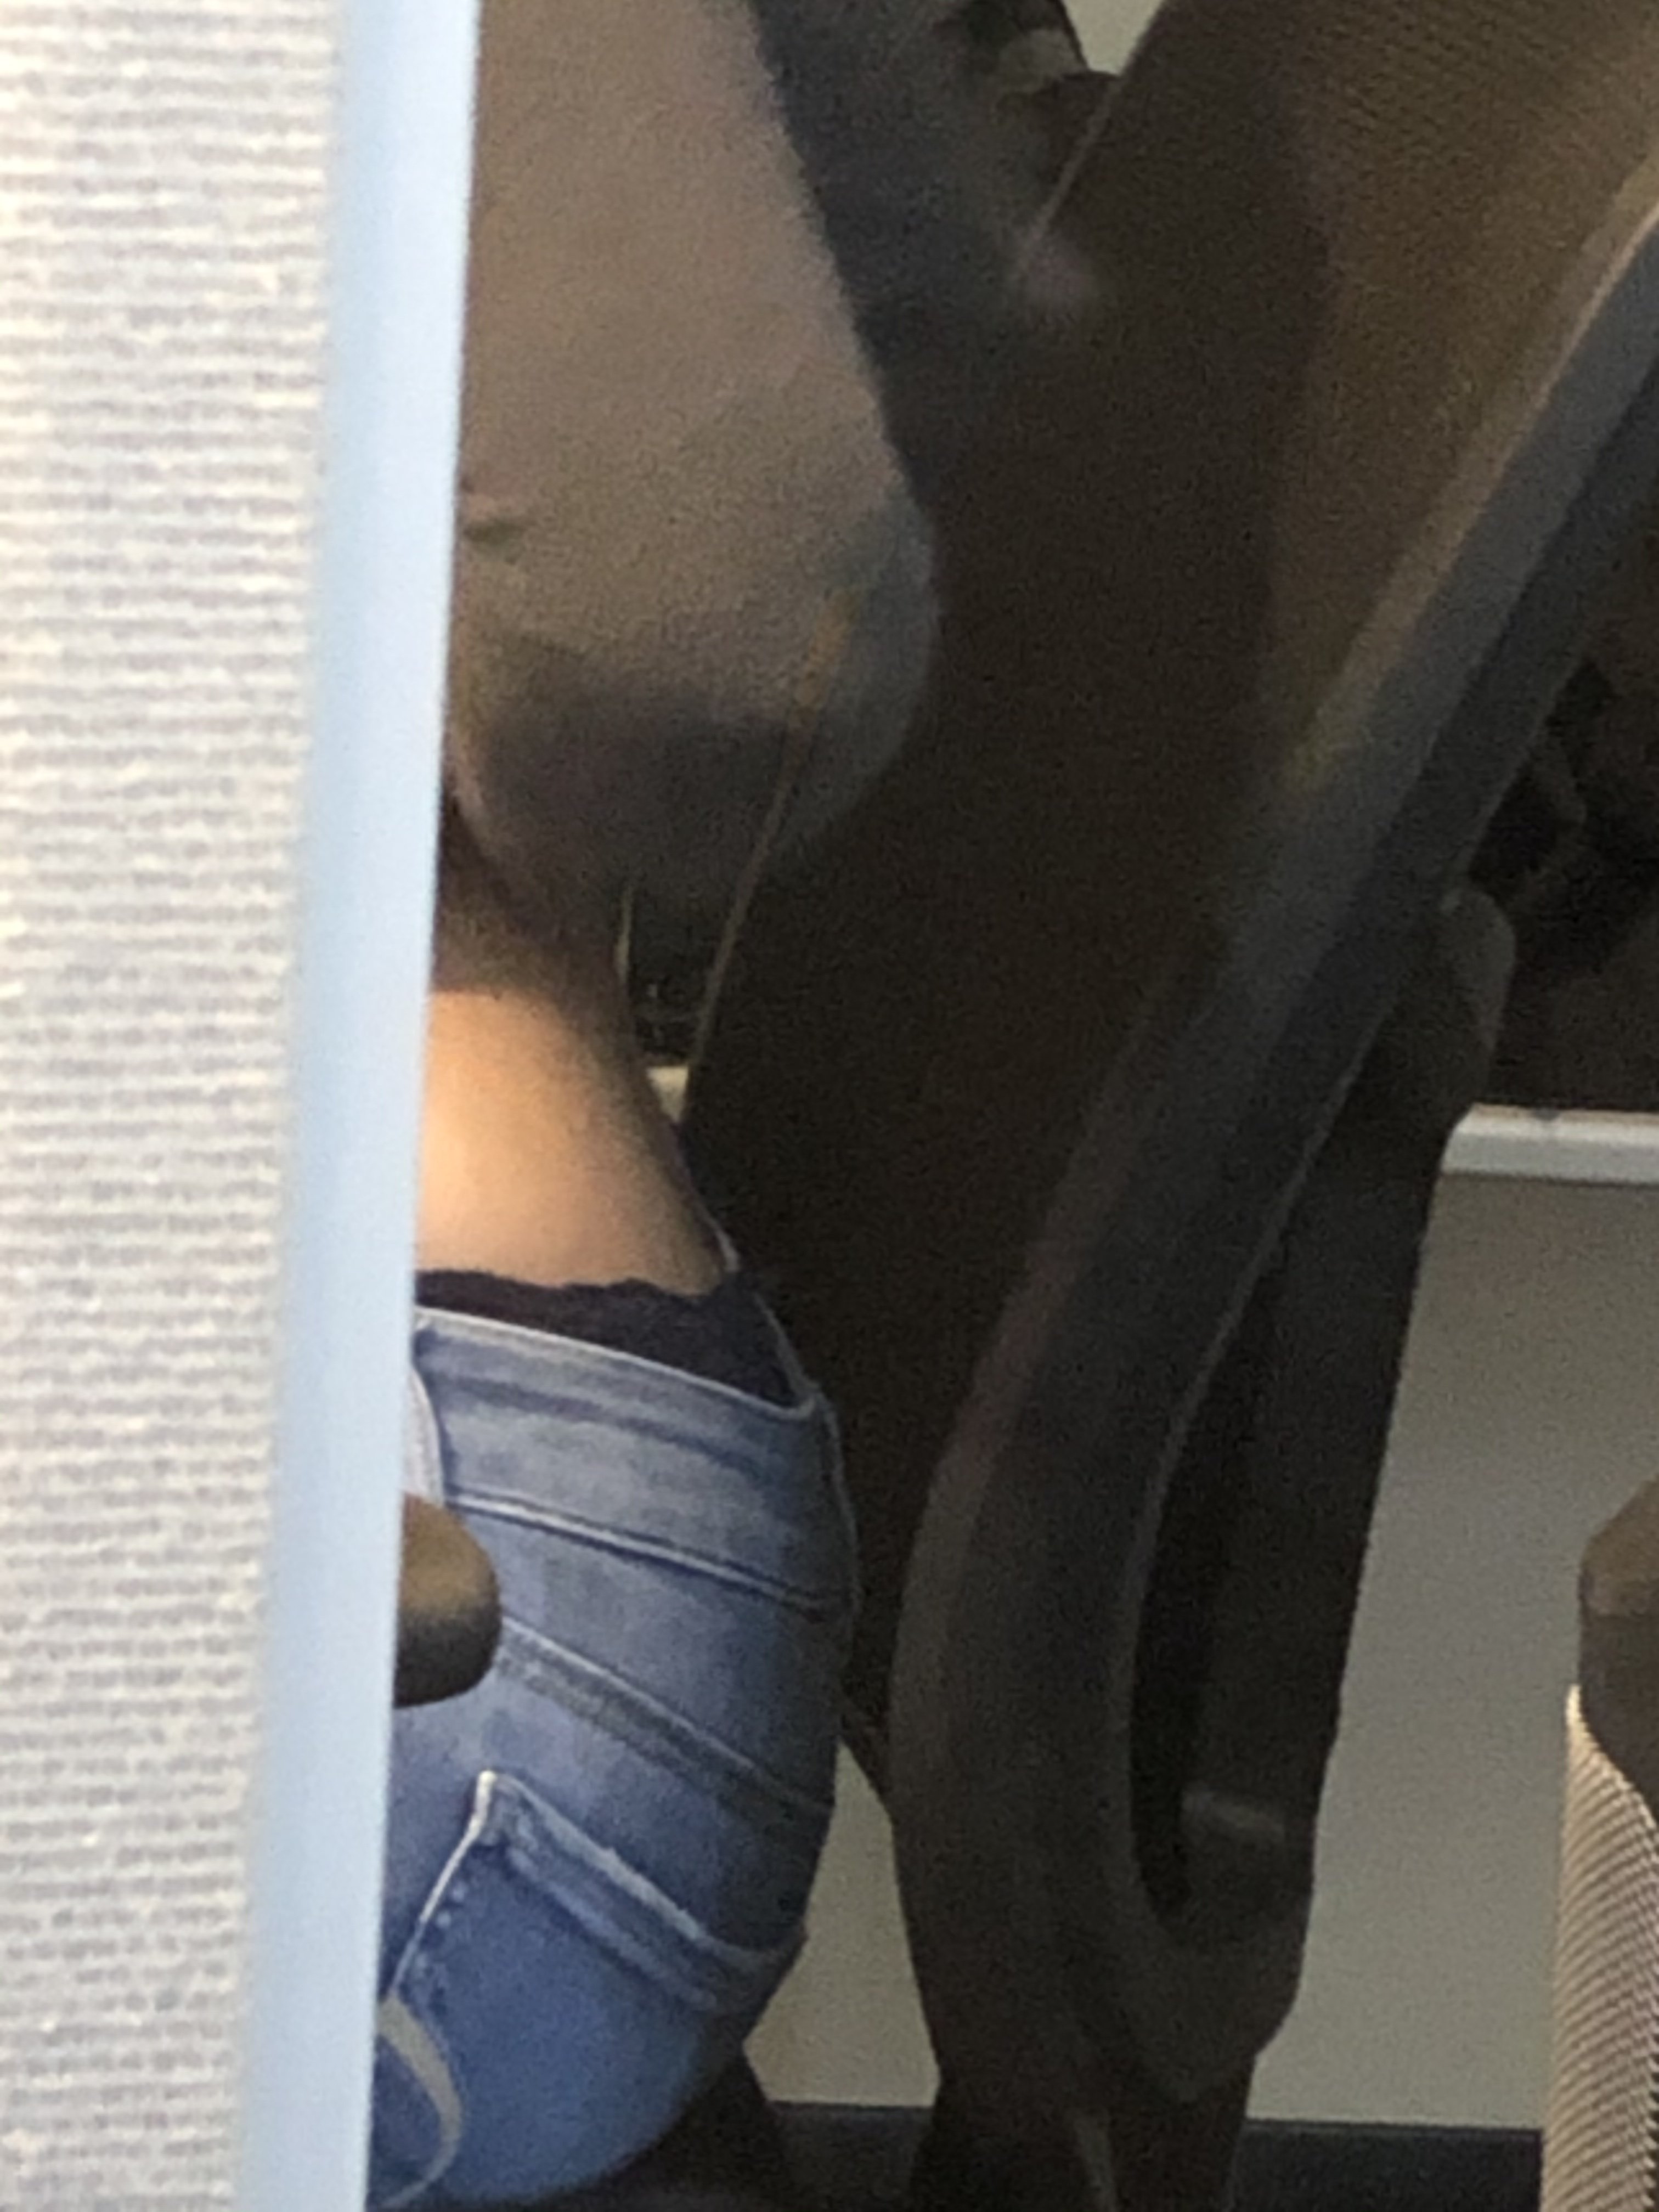 chuckles themonkey add thong slip at work photo